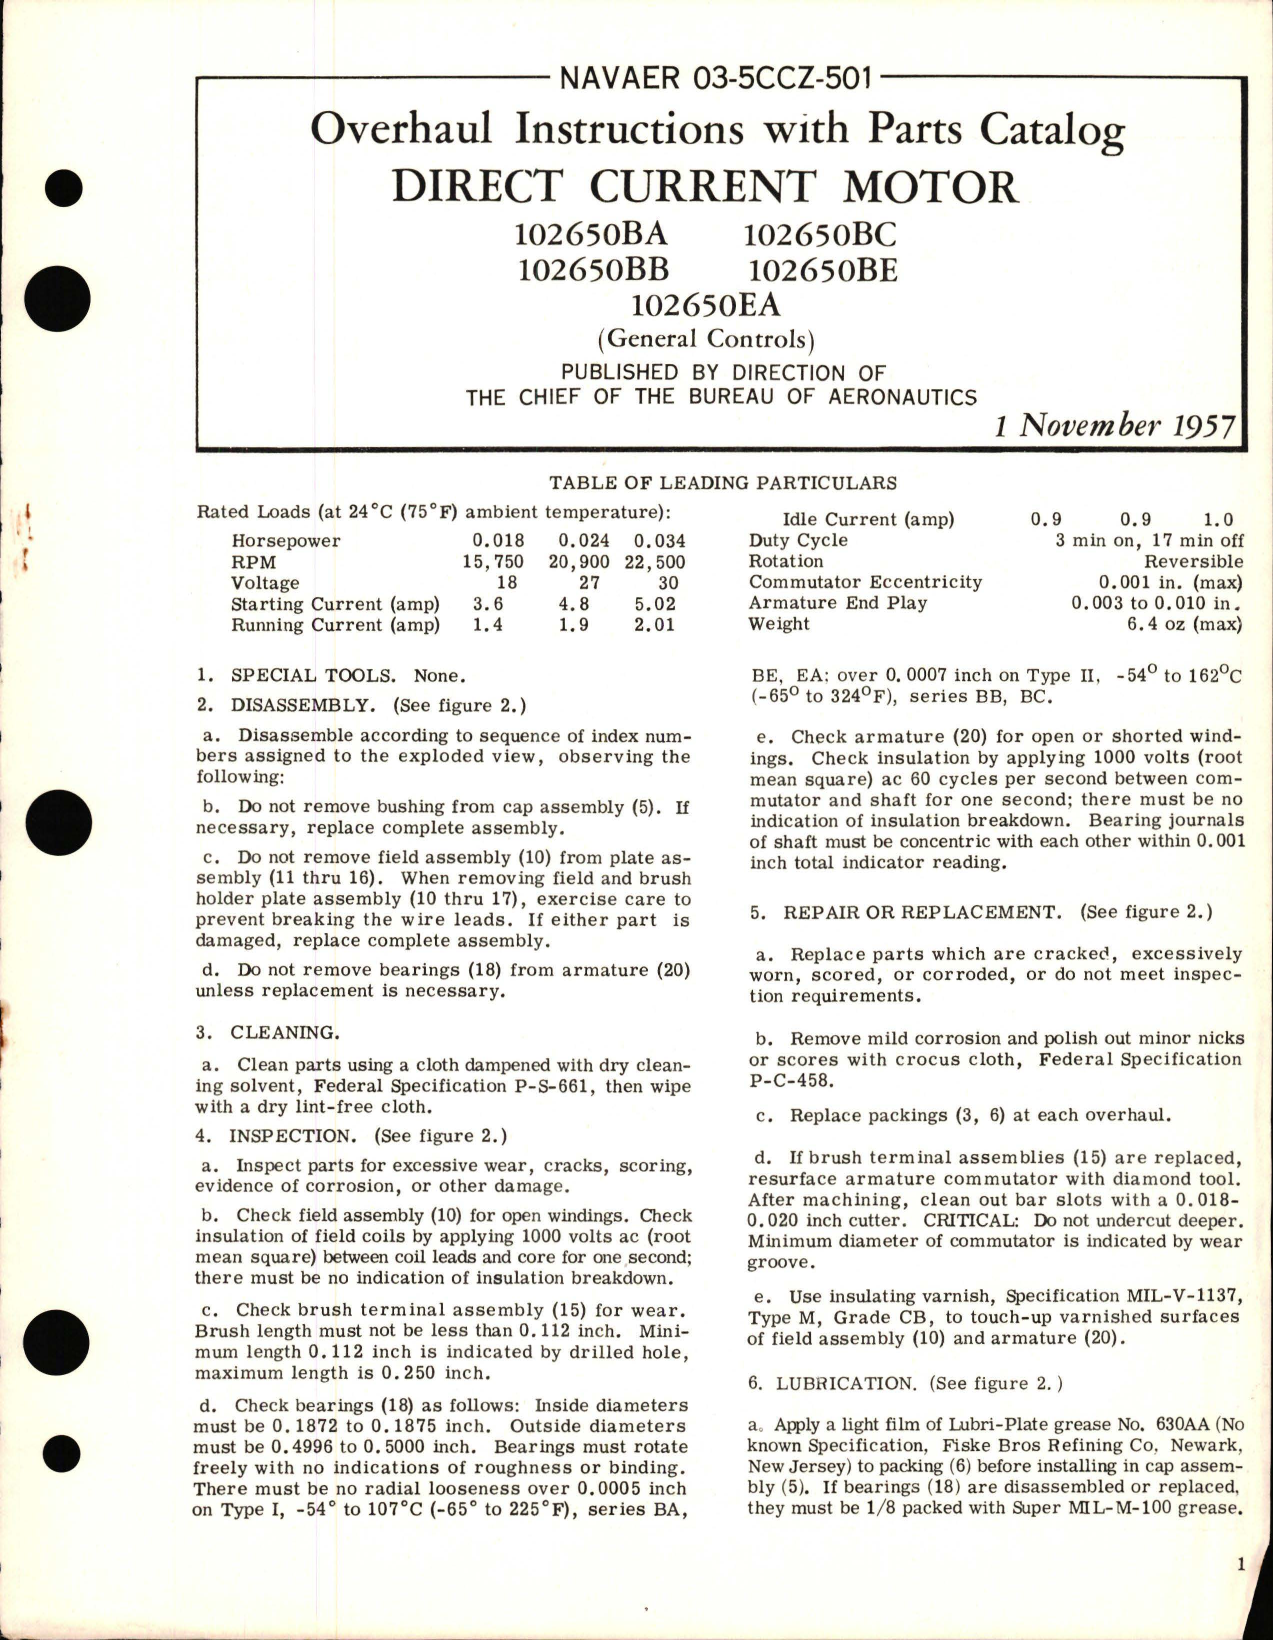 Sample page 1 from AirCorps Library document: Overhaul Instructions with Parts Catalog for Direct Current Motor 102650B Series